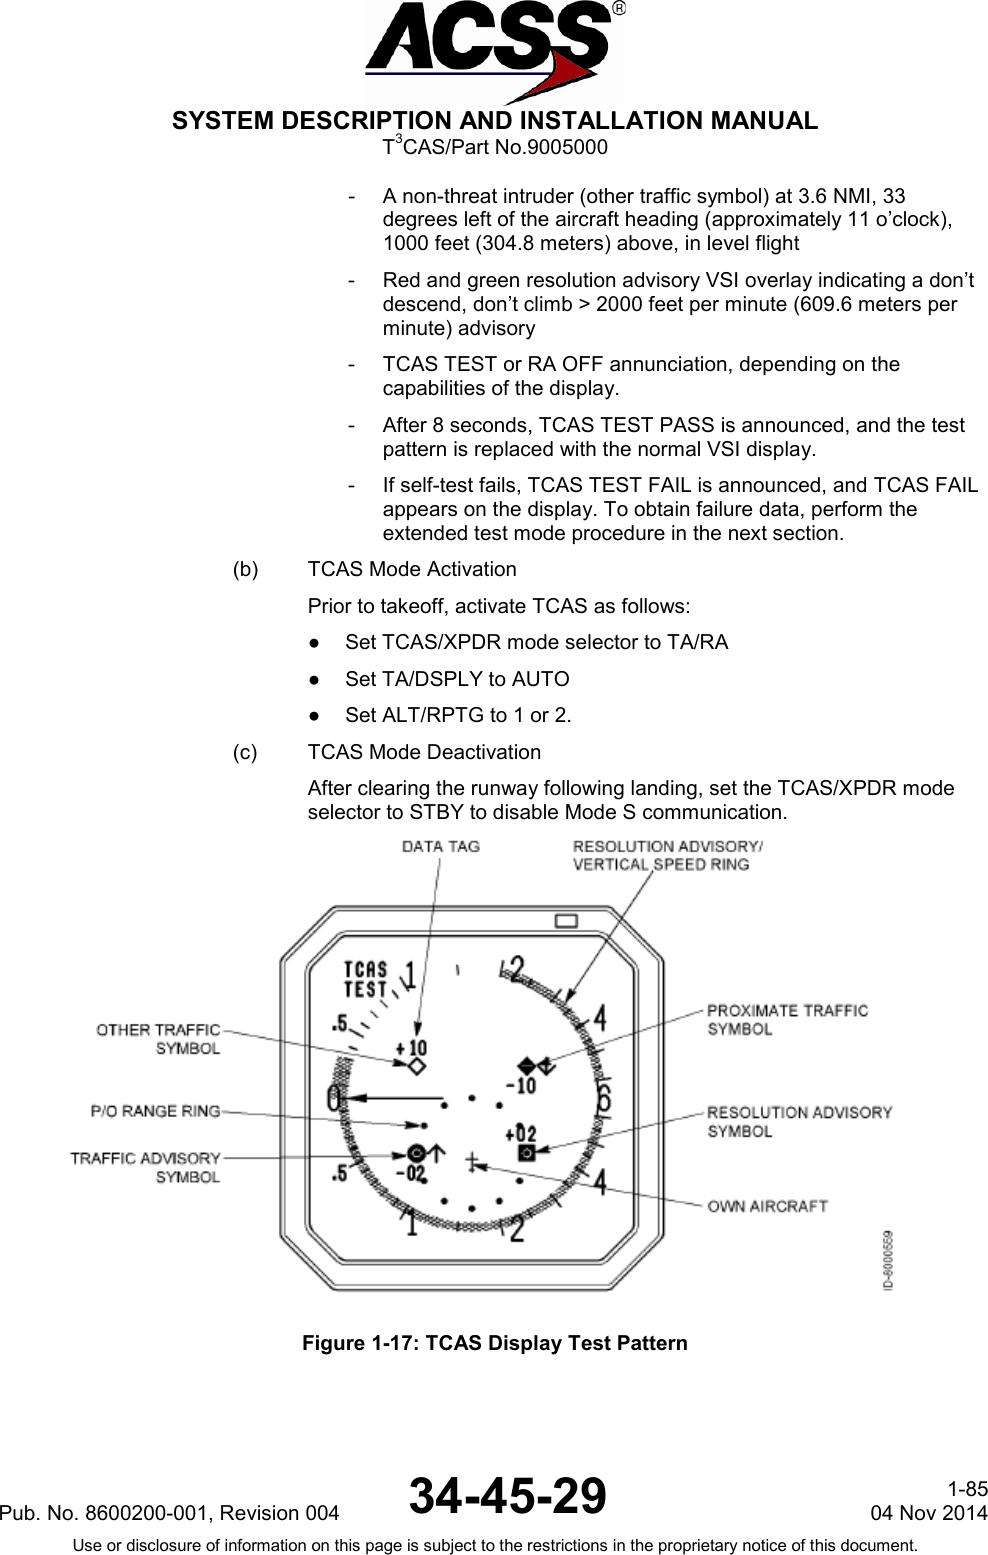  SYSTEM DESCRIPTION AND INSTALLATION MANUAL T3CAS/Part No.9005000 - A non-threat intruder (other traffic symbol) at 3.6 NMI, 33 degrees left of the aircraft heading (approximately 11 o’clock), 1000 feet (304.8 meters) above, in level flight - Red and green resolution advisory VSI overlay indicating a don’t descend, don’t climb &gt; 2000 feet per minute (609.6 meters per minute) advisory - TCAS TEST or RA OFF annunciation, depending on the capabilities of the display. - After 8 seconds, TCAS TEST PASS is announced, and the test pattern is replaced with the normal VSI display. - If self-test fails, TCAS TEST FAIL is announced, and TCAS FAIL appears on the display. To obtain failure data, perform the extended test mode procedure in the next section. (b) TCAS Mode Activation Prior to takeoff, activate TCAS as follows: ●  Set TCAS/XPDR mode selector to TA/RA ●  Set TA/DSPLY to AUTO ●  Set ALT/RPTG to 1 or 2. (c) TCAS Mode Deactivation After clearing the runway following landing, set the TCAS/XPDR mode selector to STBY to disable Mode S communication.  Figure 1-17: TCAS Display Test Pattern Pub. No. 8600200-001, Revision 004 34-45-29 1-85 04 Nov 2014 Use or disclosure of information on this page is subject to the restrictions in the proprietary notice of this document.  